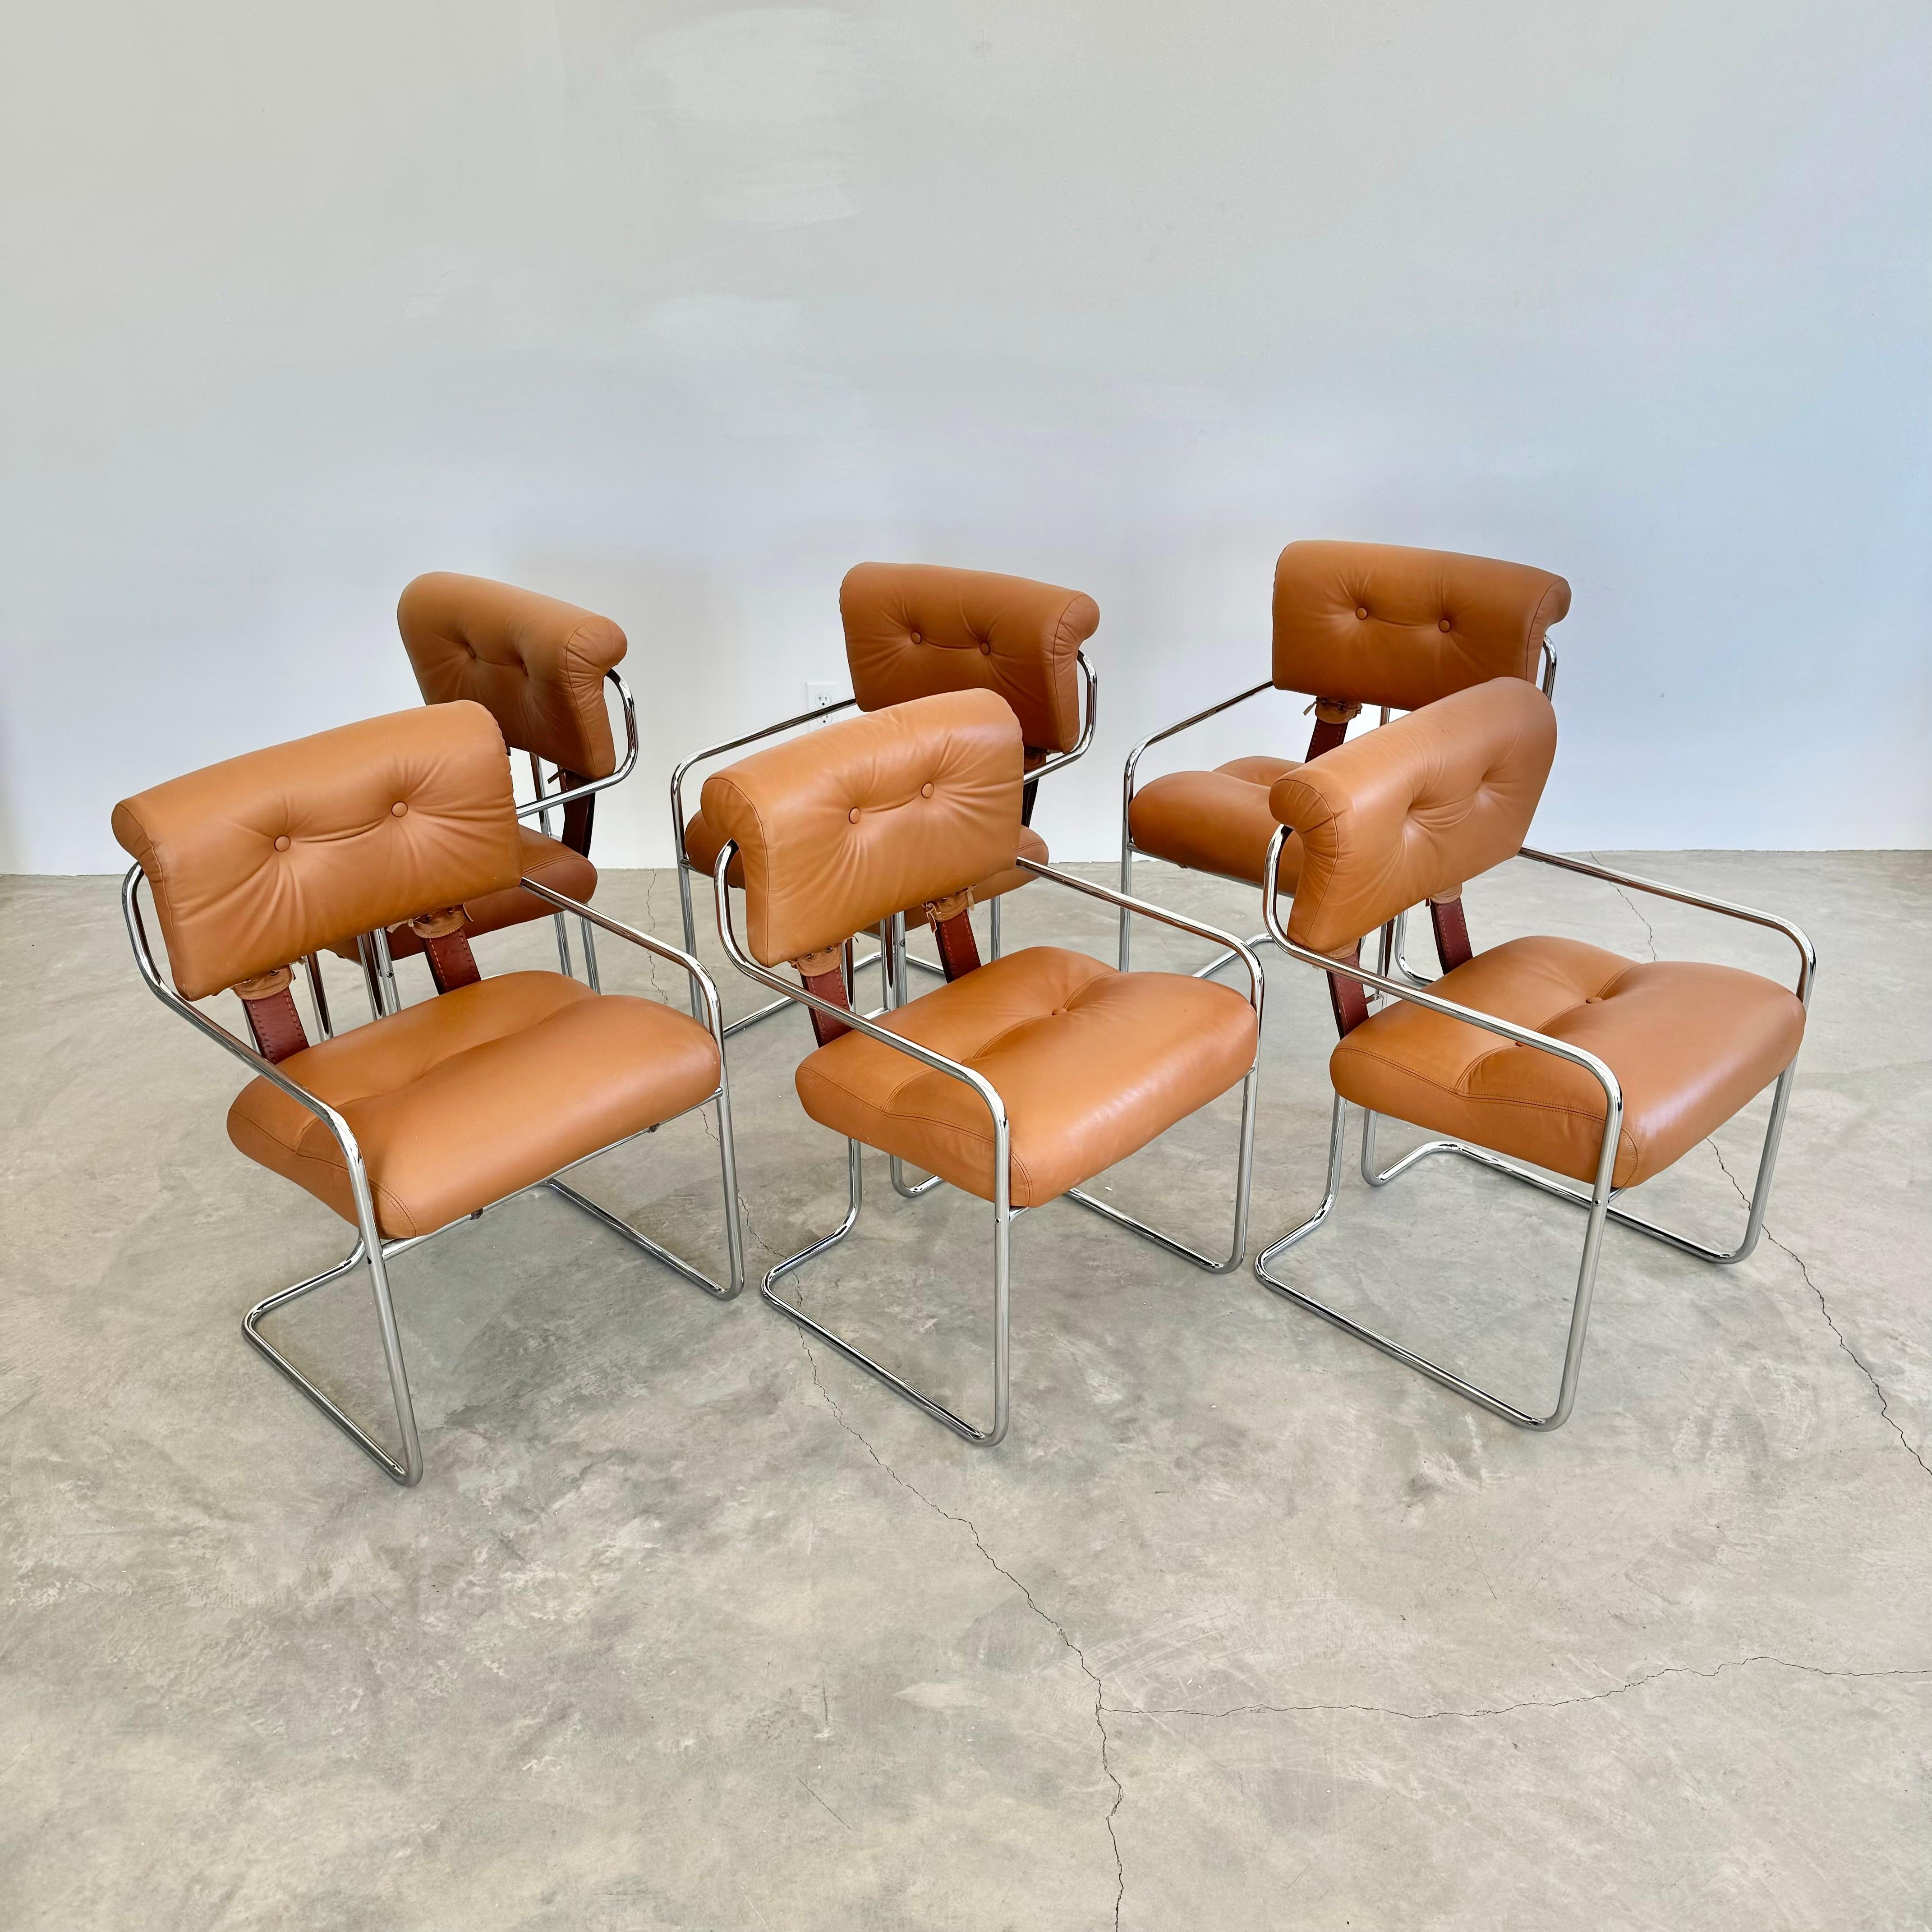 Late 20th Century Set of 6 'Tucroma' Chairs in Tan by Guido Faleschini, 1970s Italy For Sale